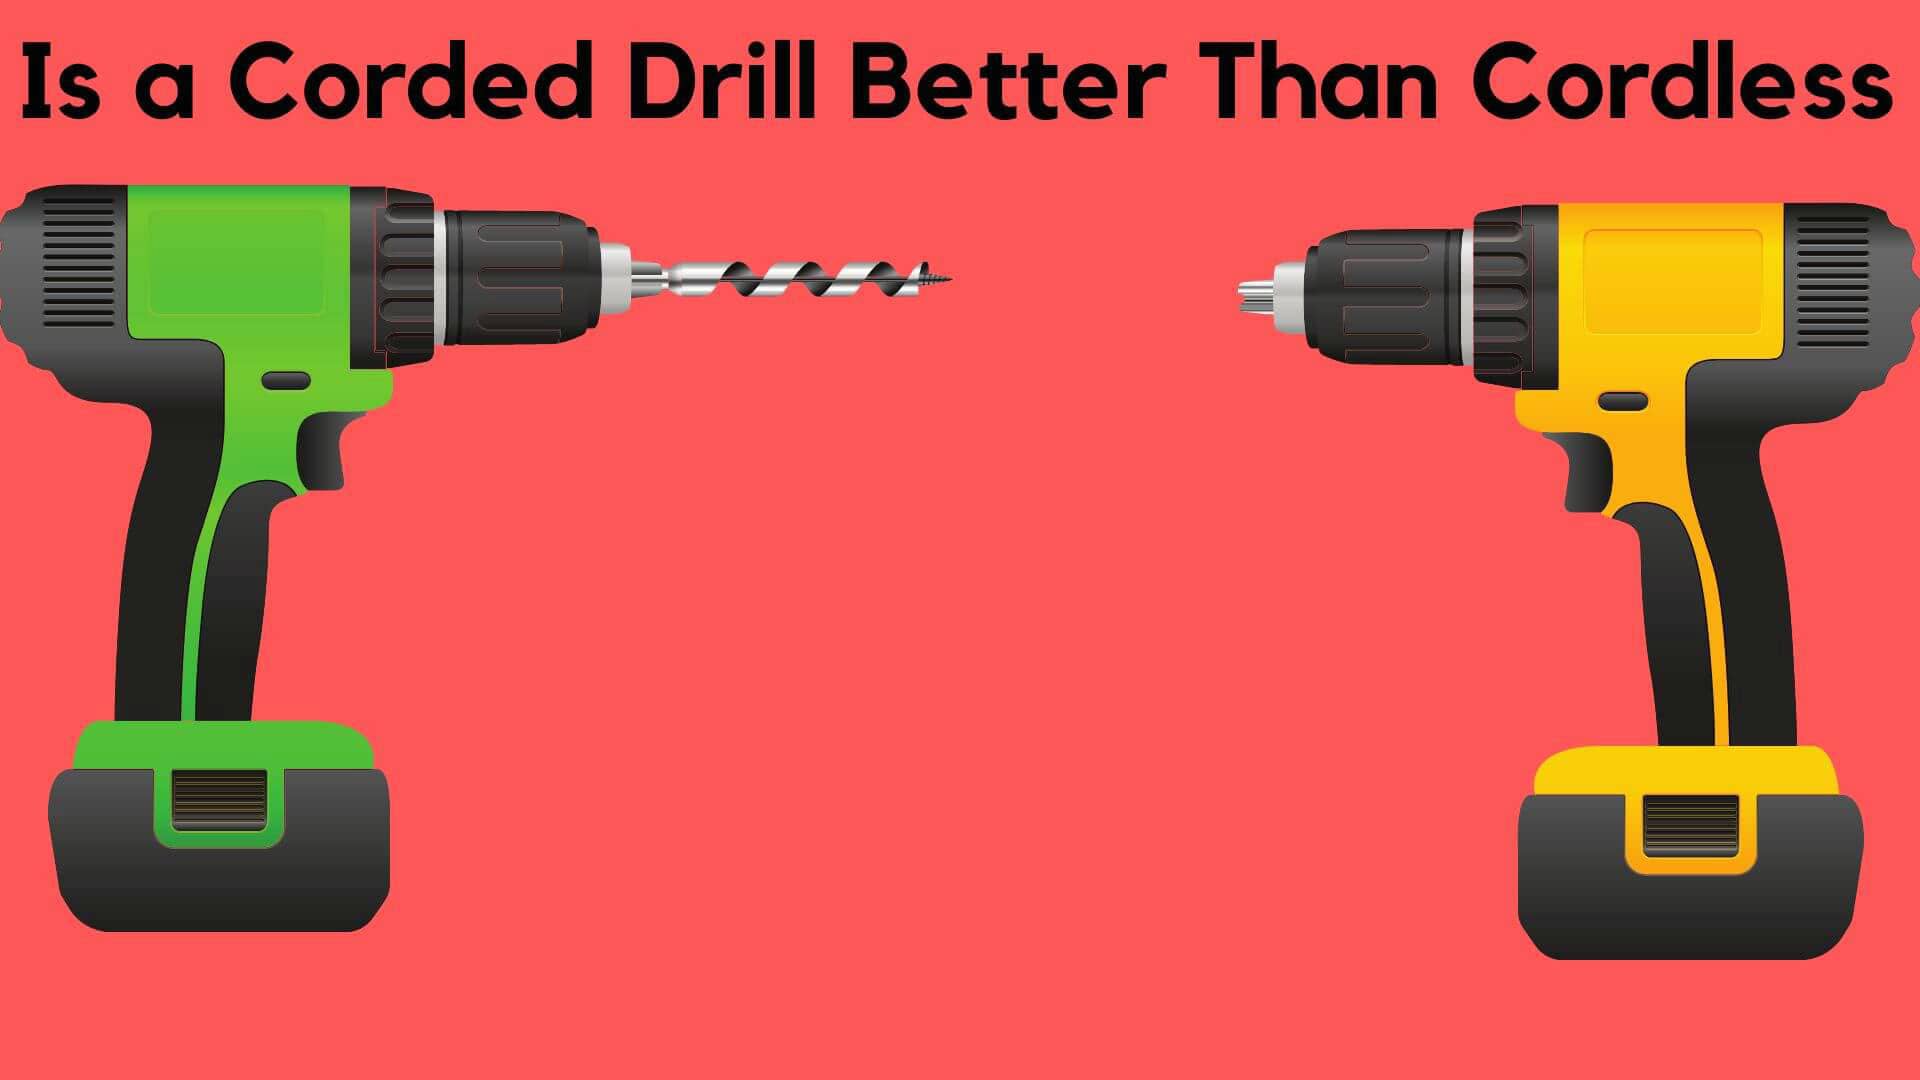 Is a Corded Drill Better Than Cordless?